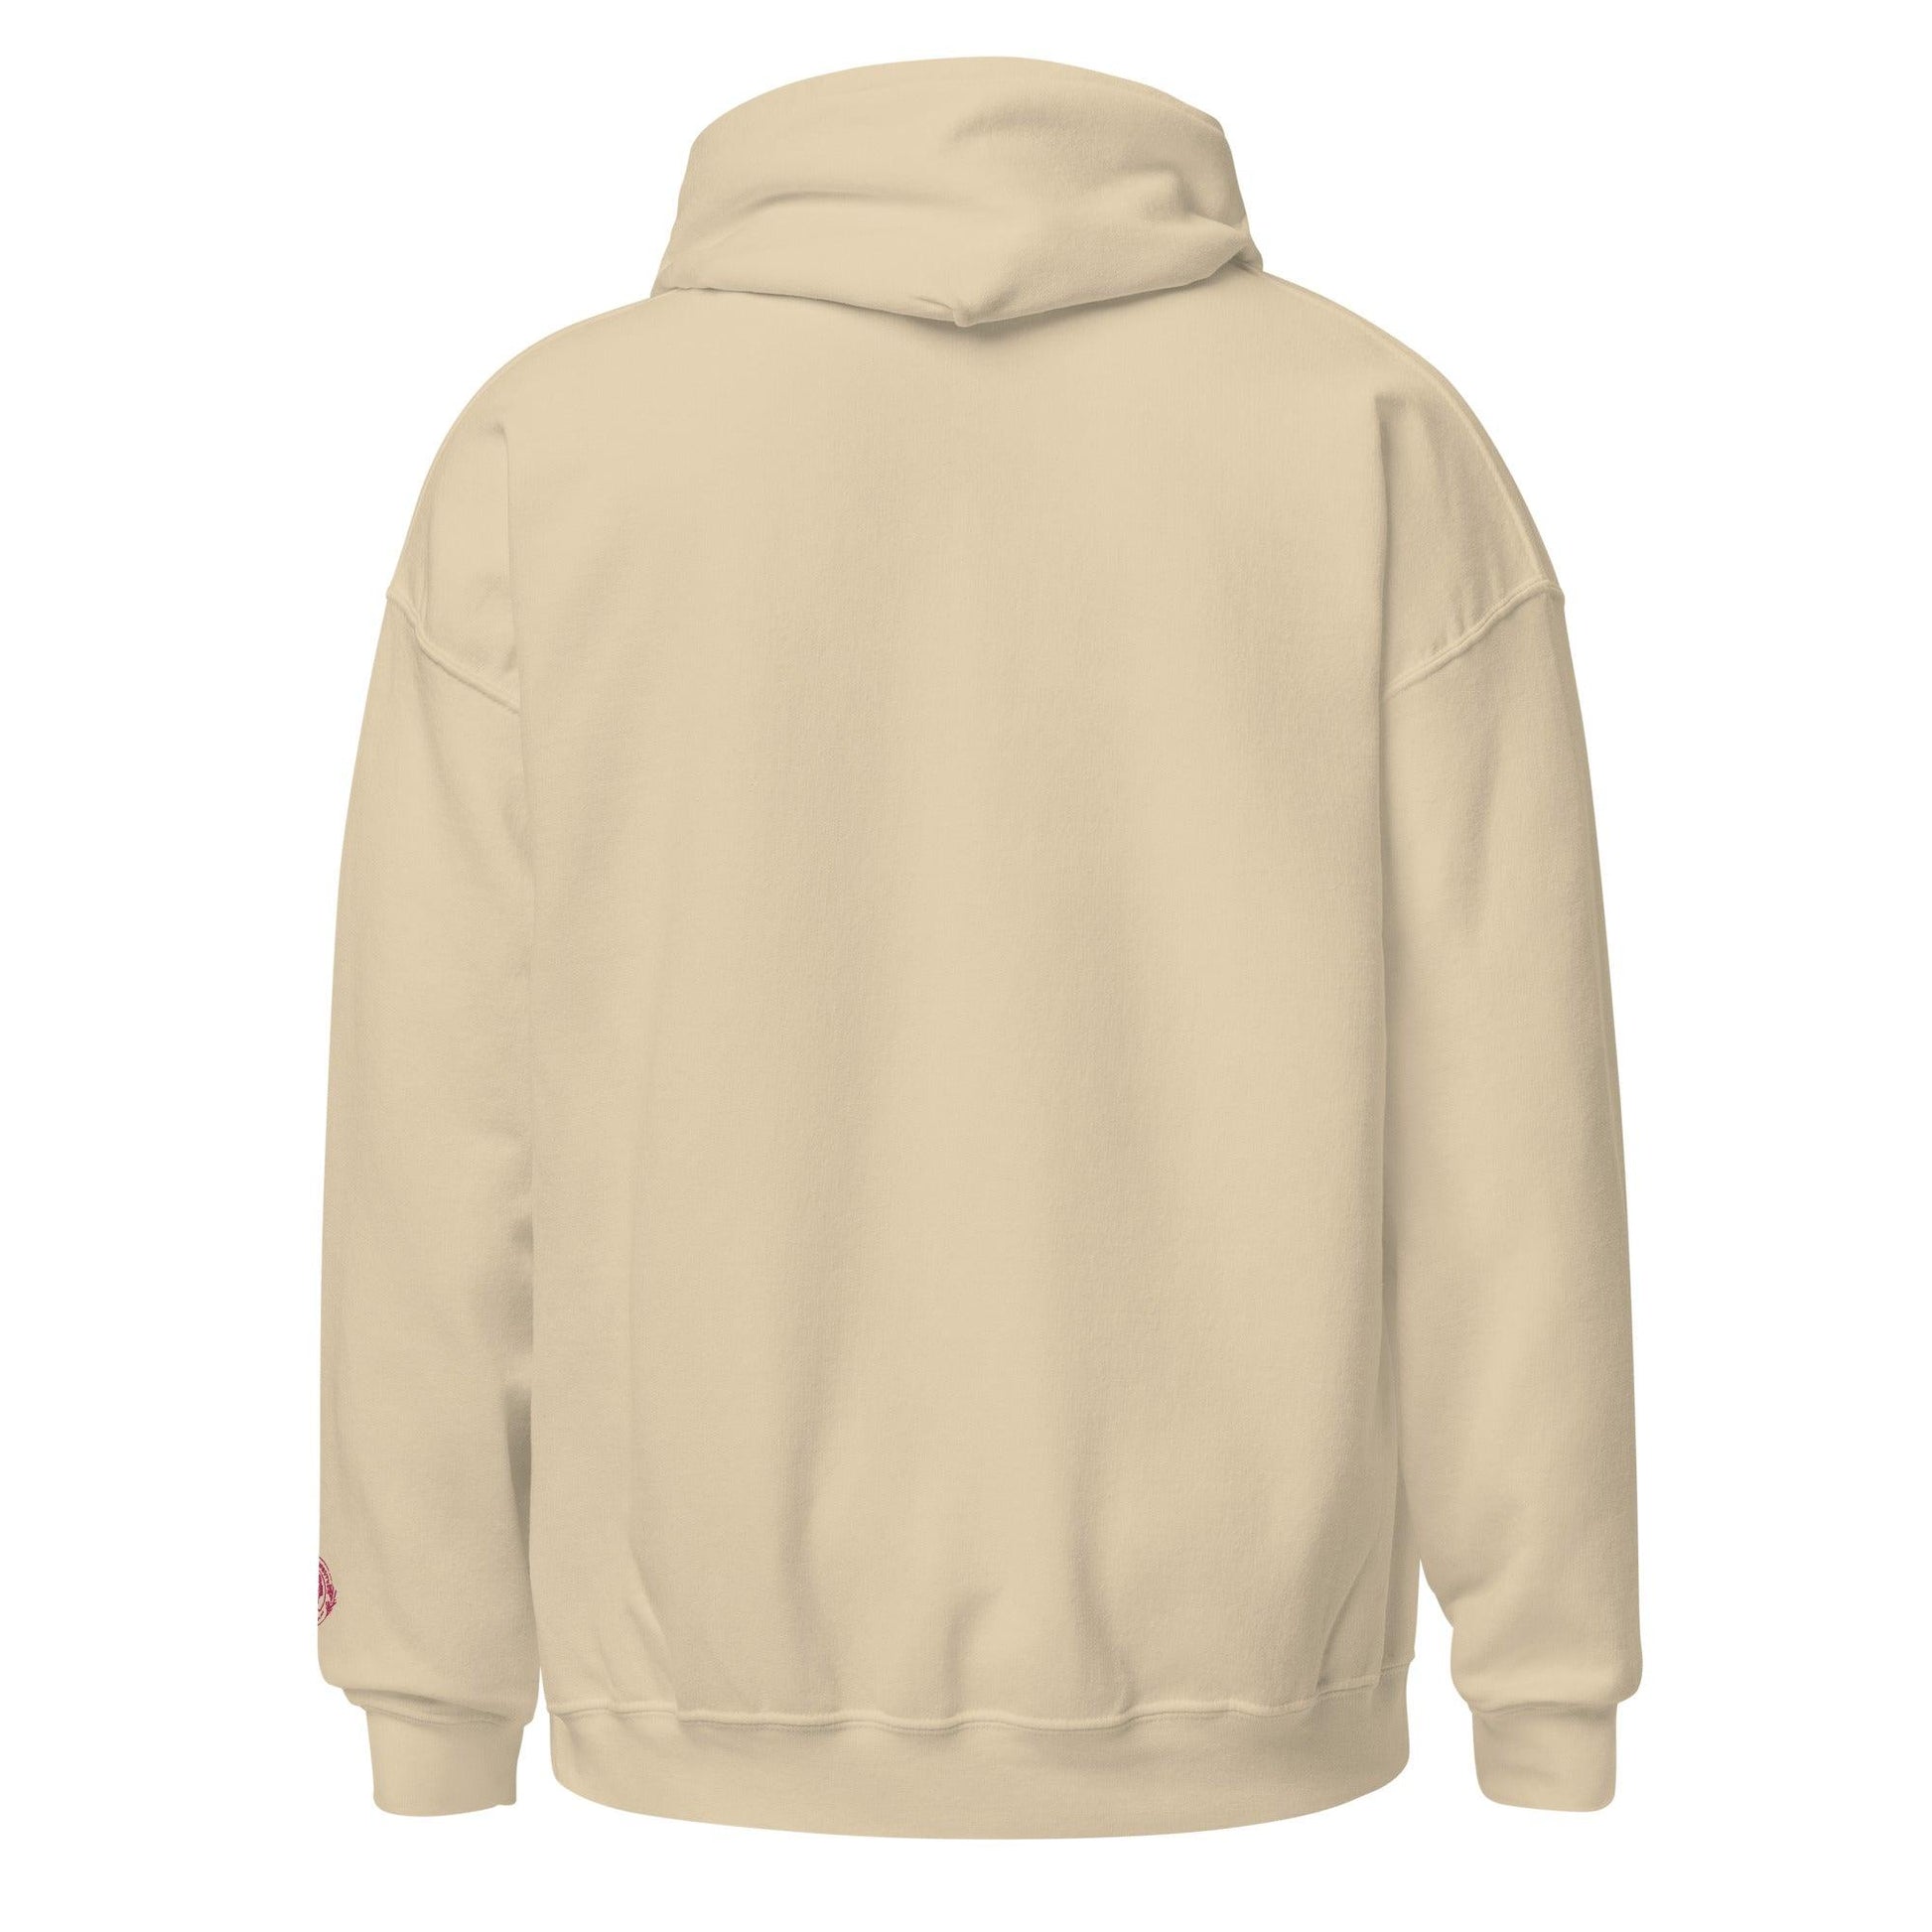 Embroidery Pullover Unisex Hoodie - COFFEEBRE